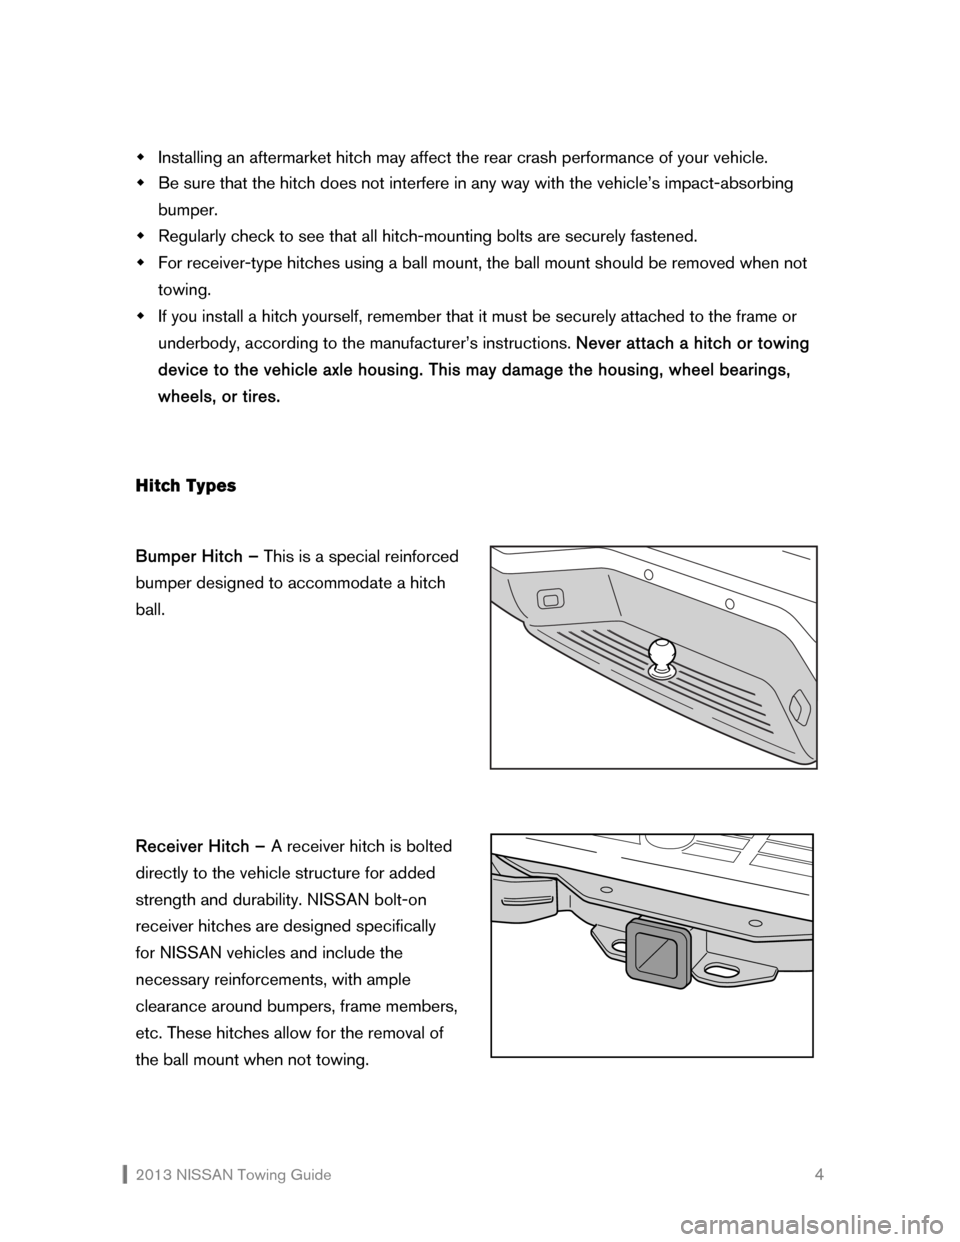 NISSAN FRONTIER 2013 D40 / 2.G Towing Guide  2013 NISSAN Towing Guide    4  Š Installing an aftermarket hitch may affect the rear crash performance of your vehicle. 
 Š Be sure that the hitch does not interfere in any way with the vehicle’s